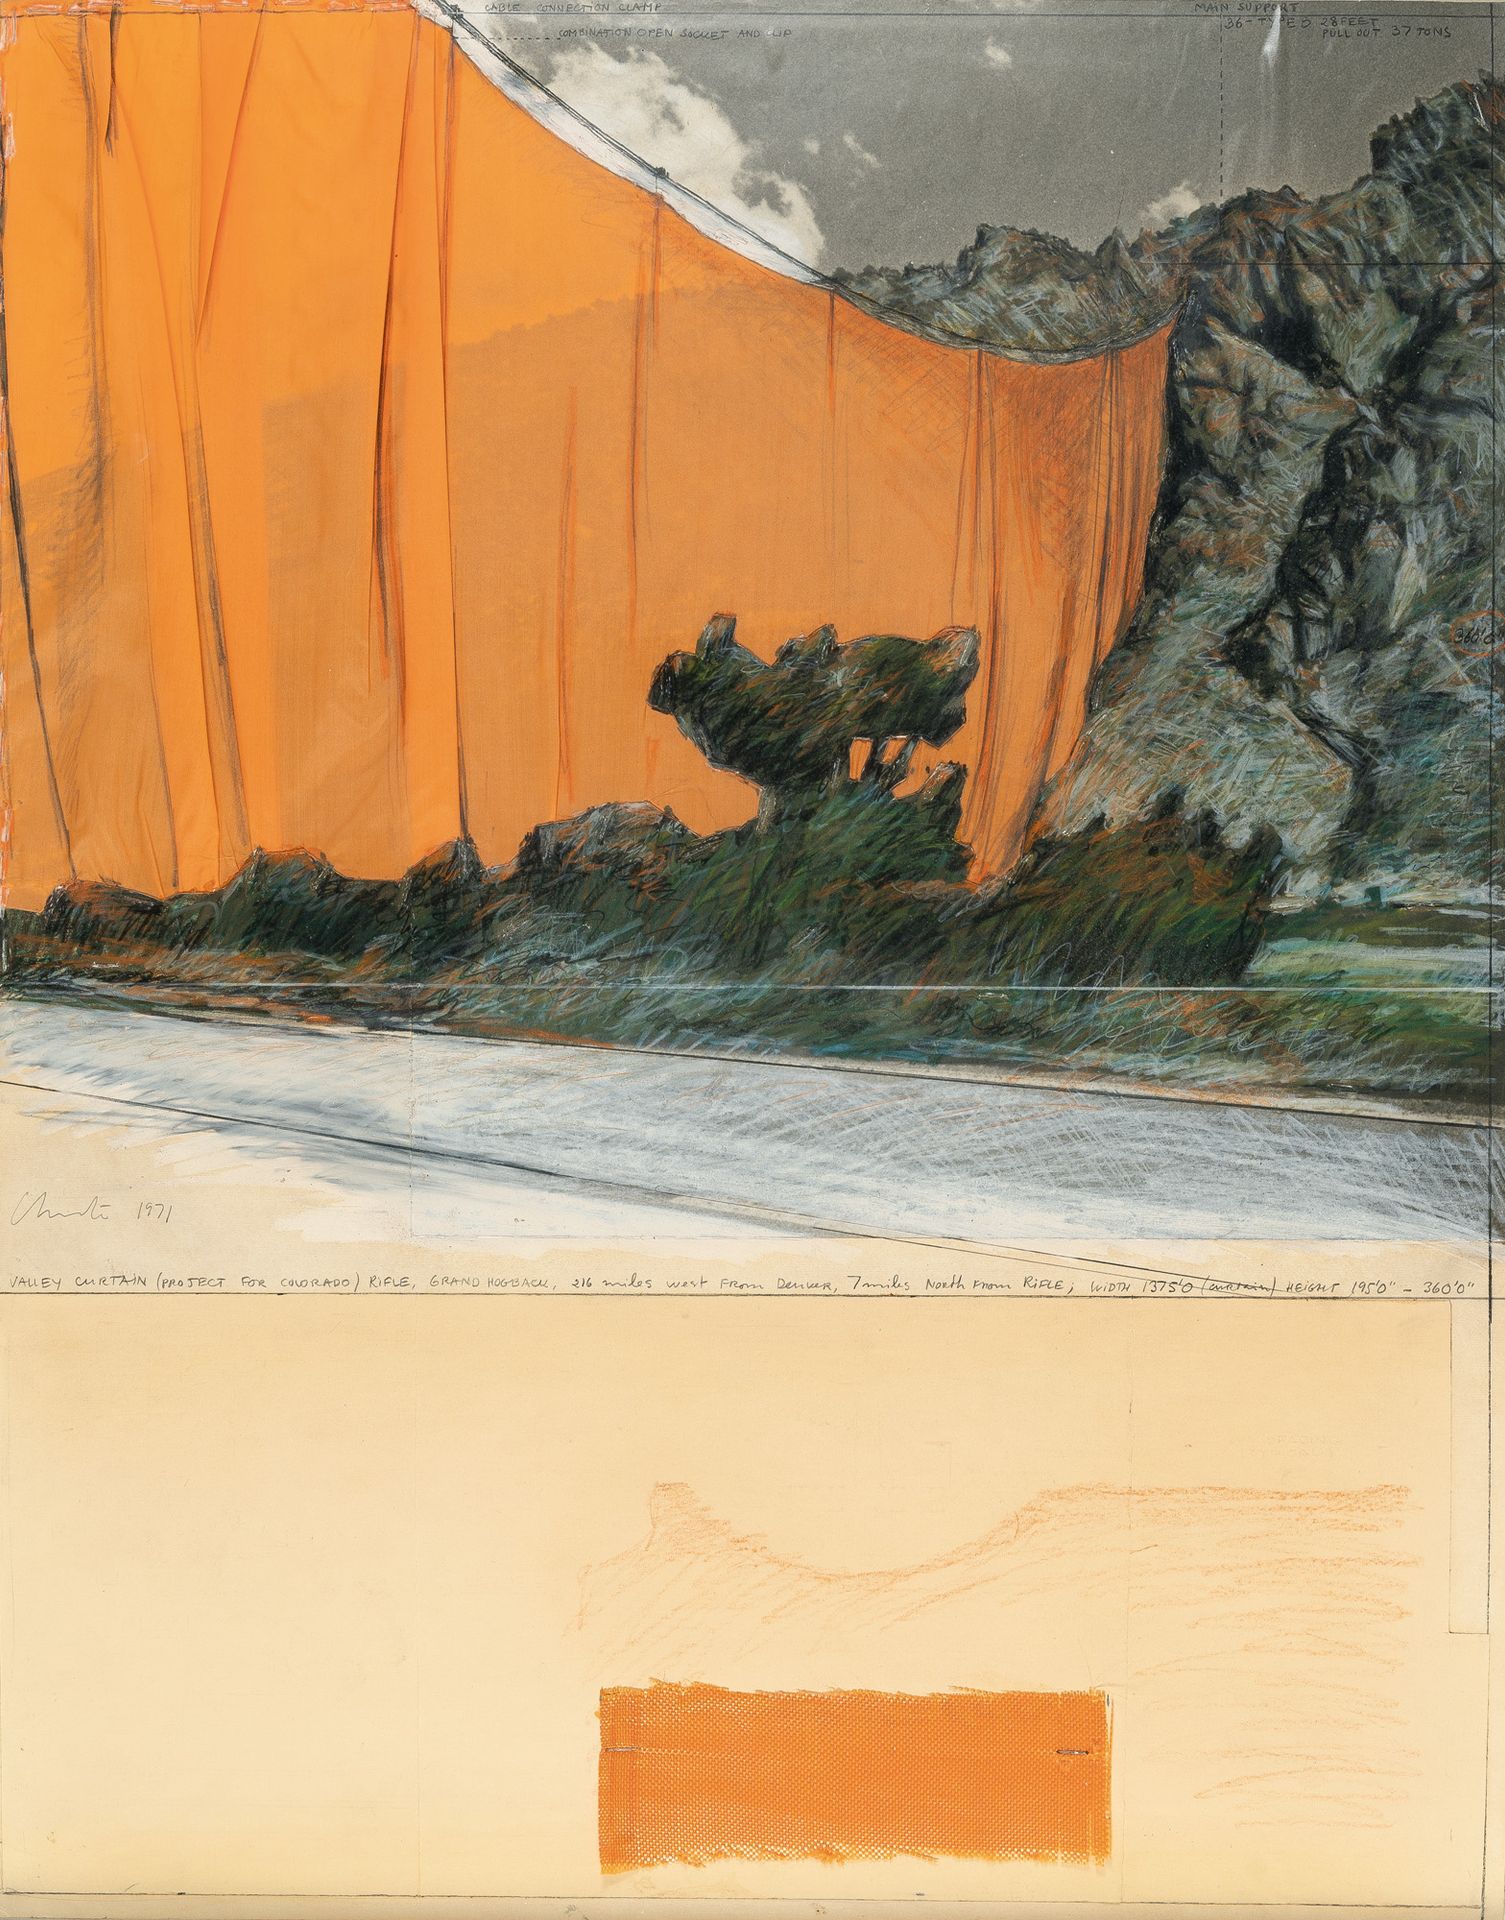 Christo und Jeanne-Claude Christo y Jeanne-Claude, "Valley Curtain (Project for &hellip;